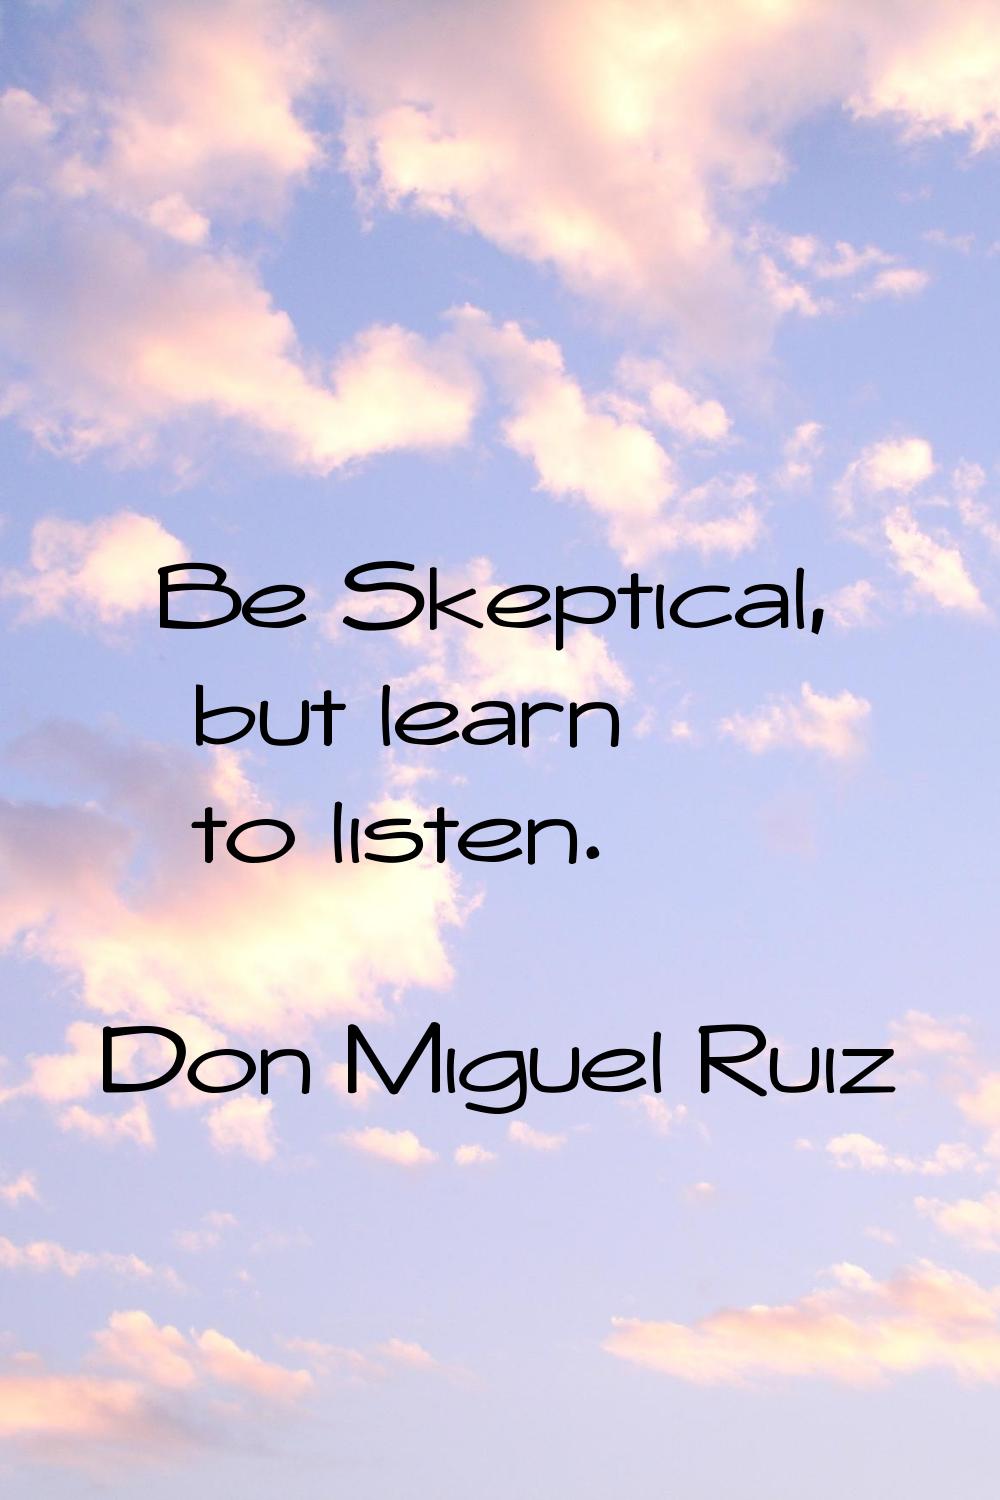 Be Skeptical, but learn to listen.